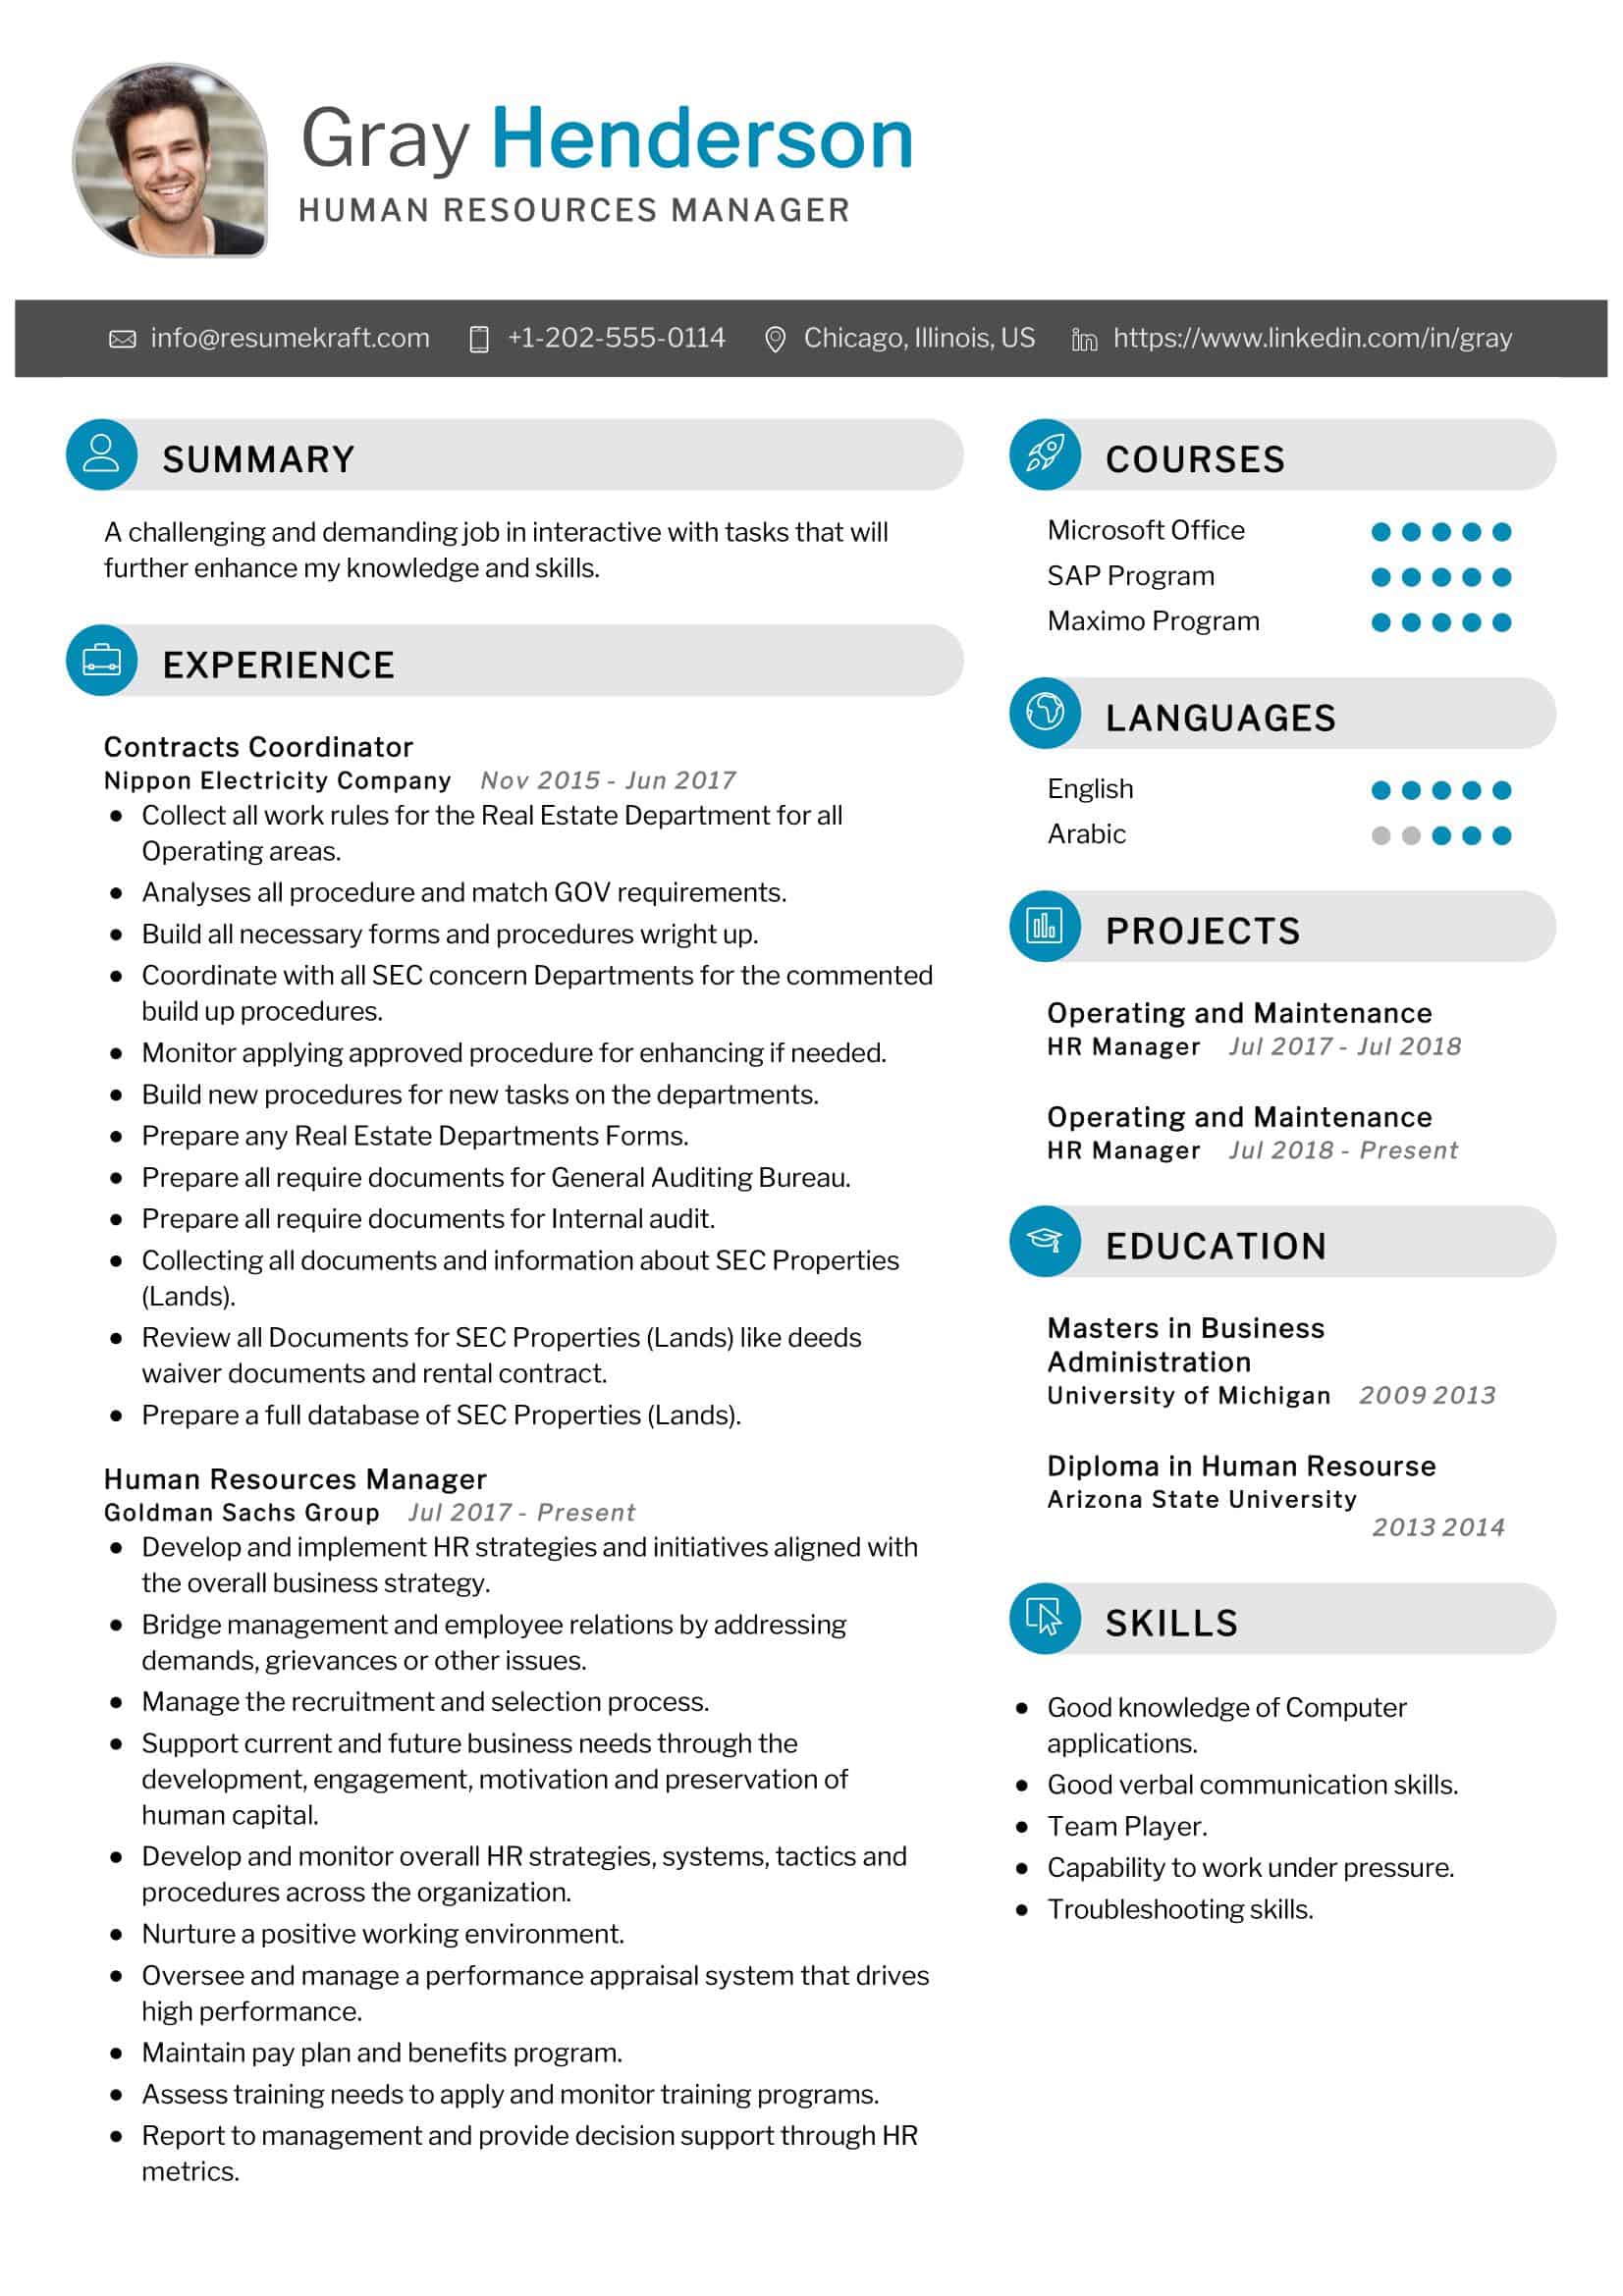 human-resources-manager-resume-template-odbatman